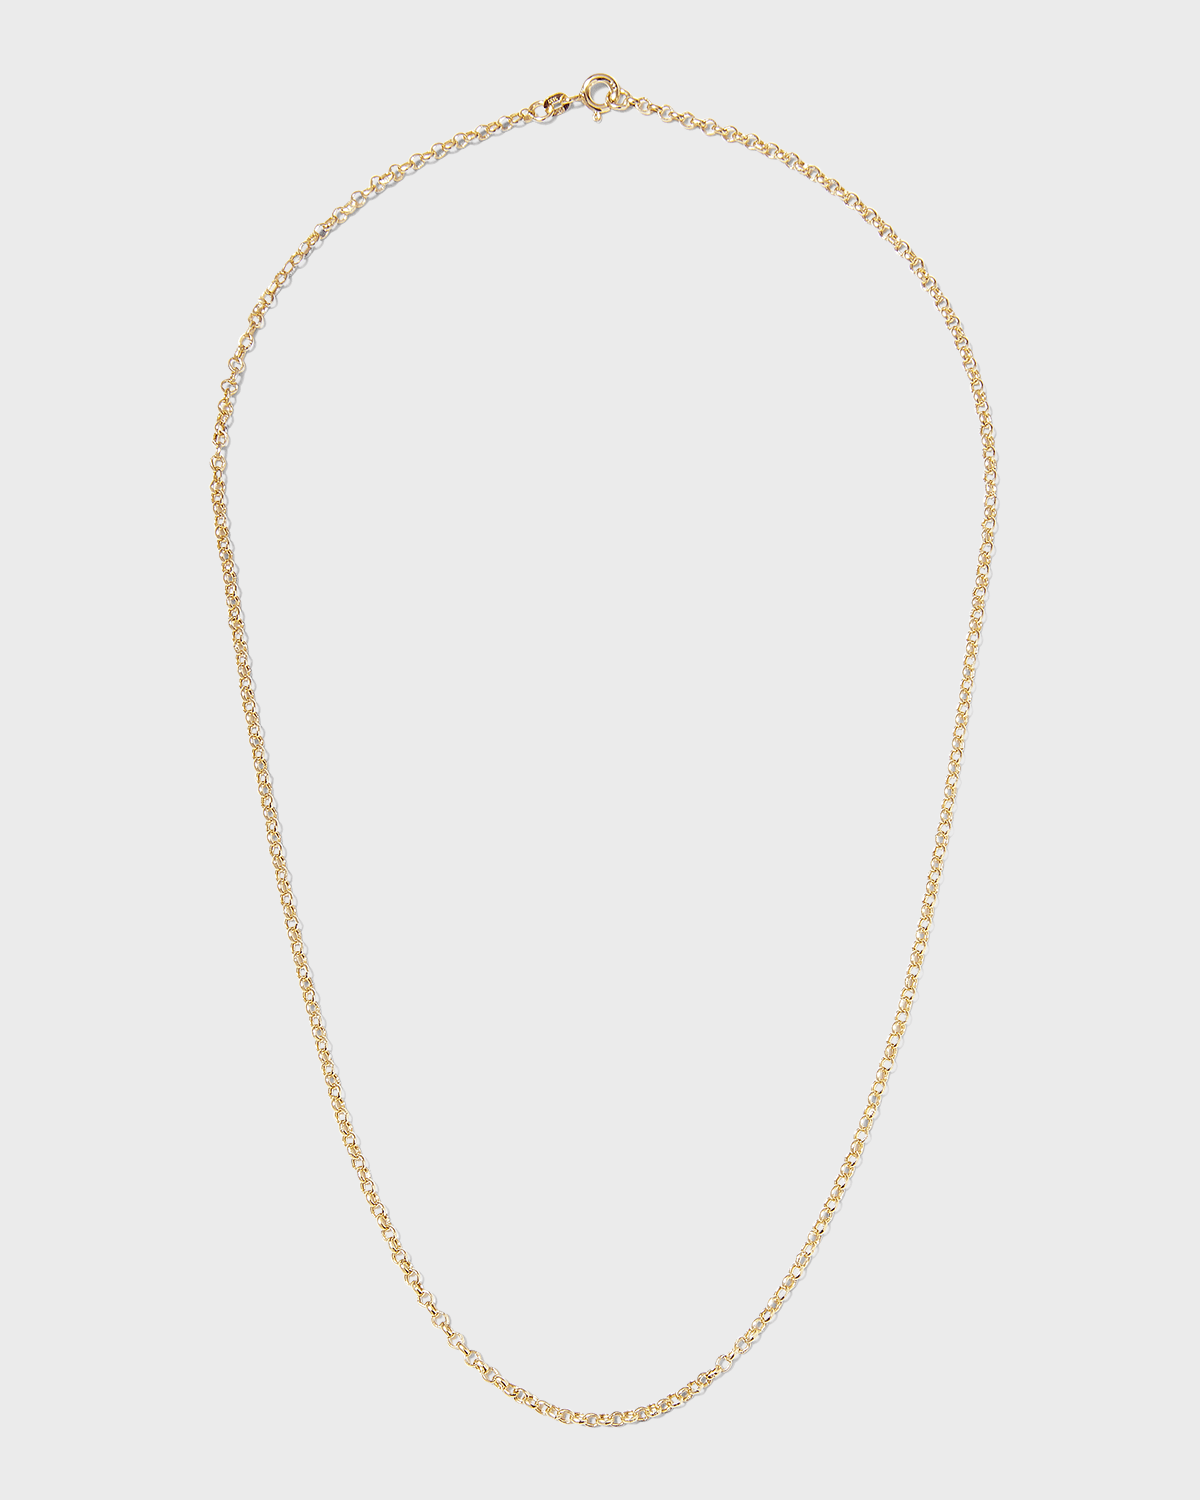 Kastel Jewelry 14K Yellow Gold Rolo Chain Necklace, 18"L